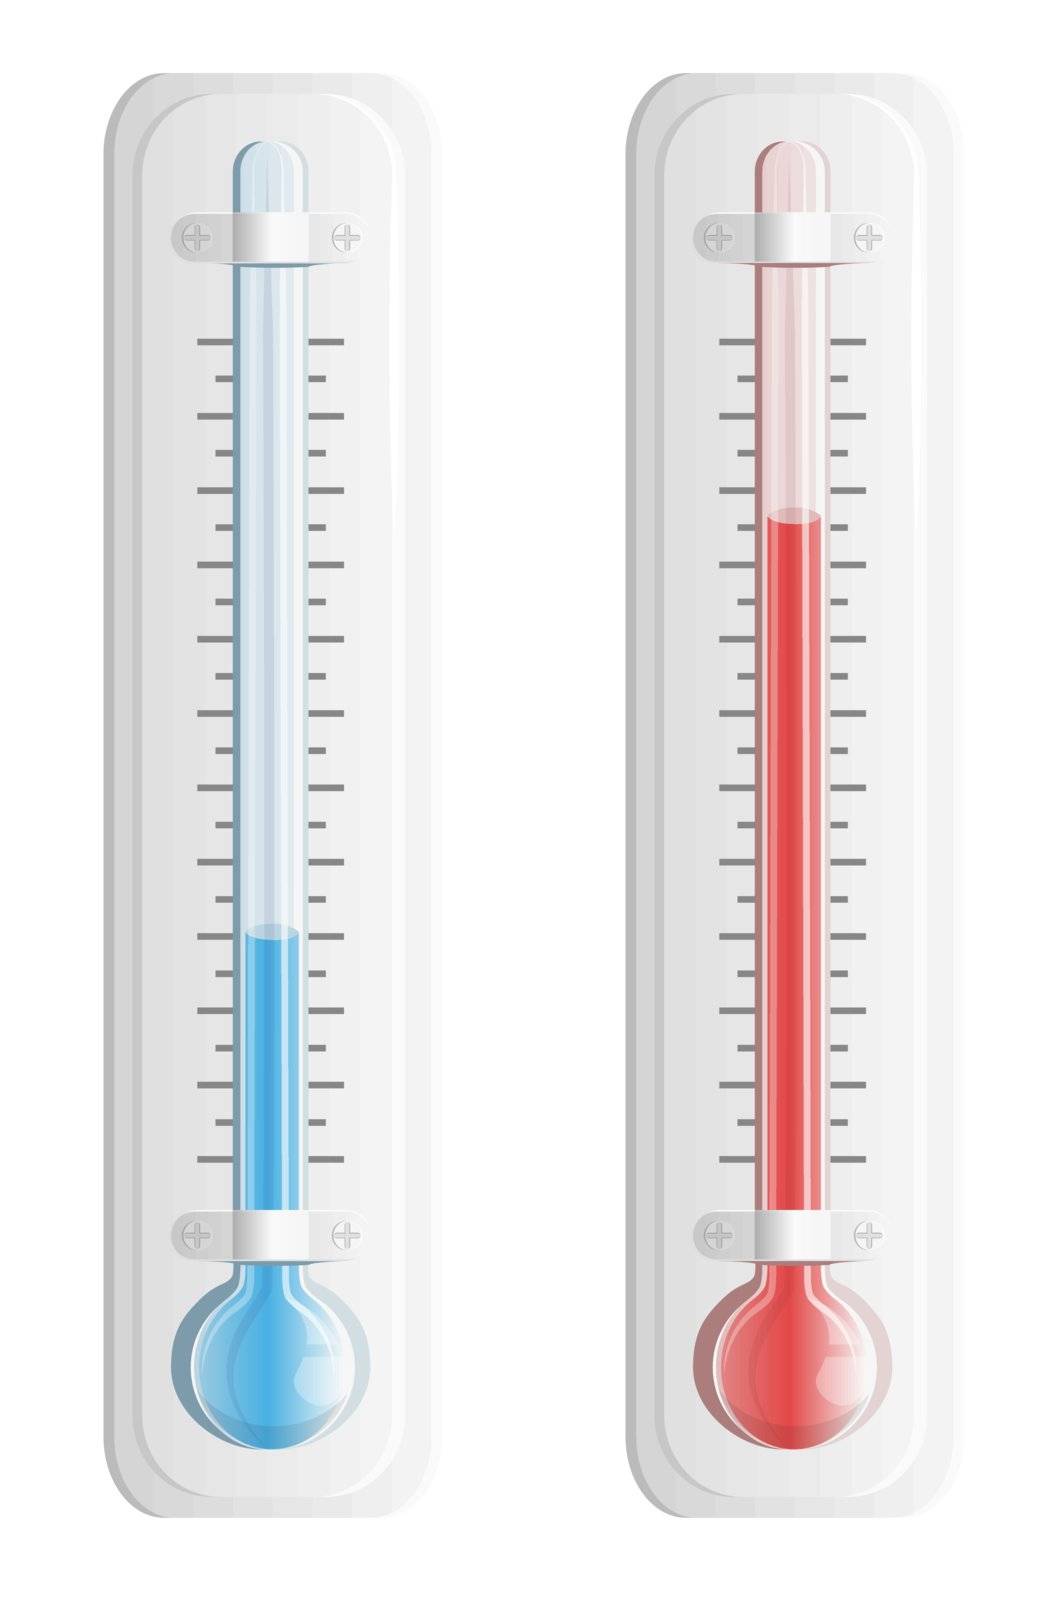 Thermometer measuring hot and cold temperature. Vector. EPS8